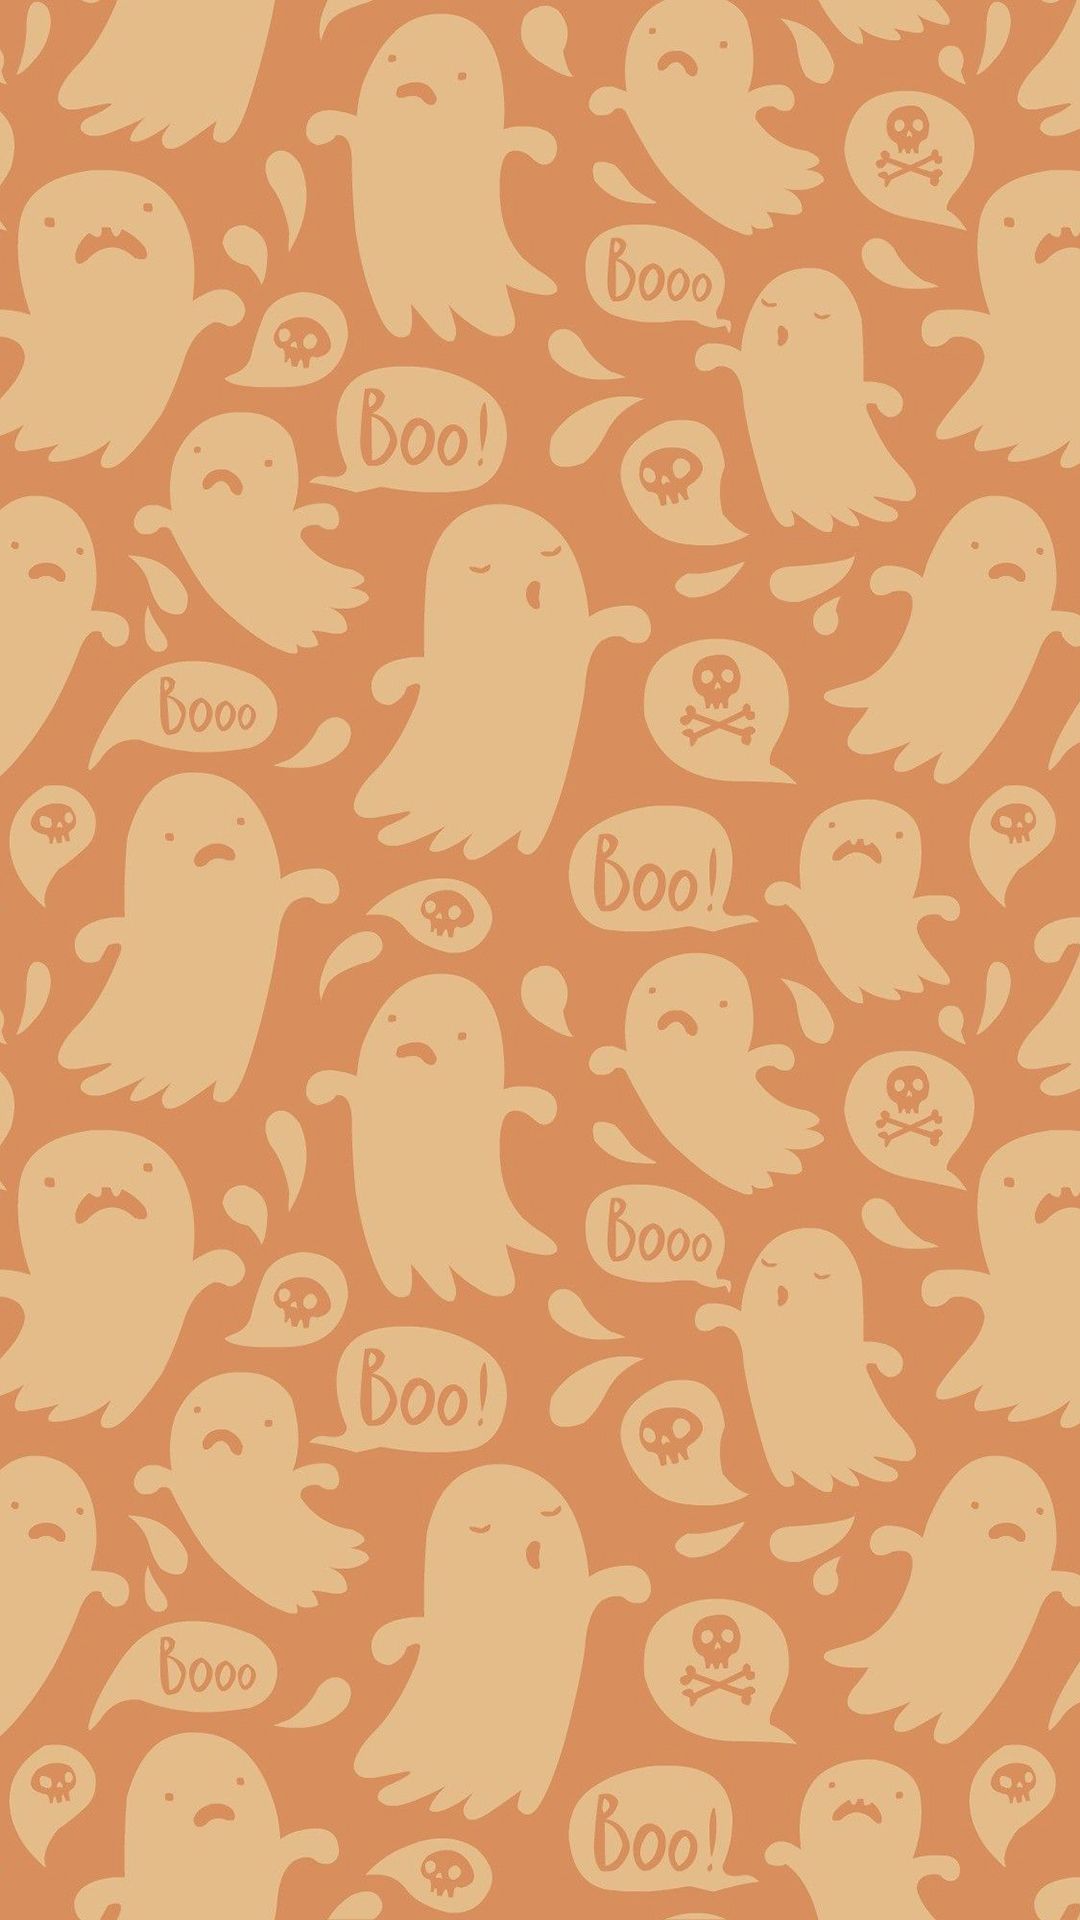 A pattern of ghost and other things - Ghost